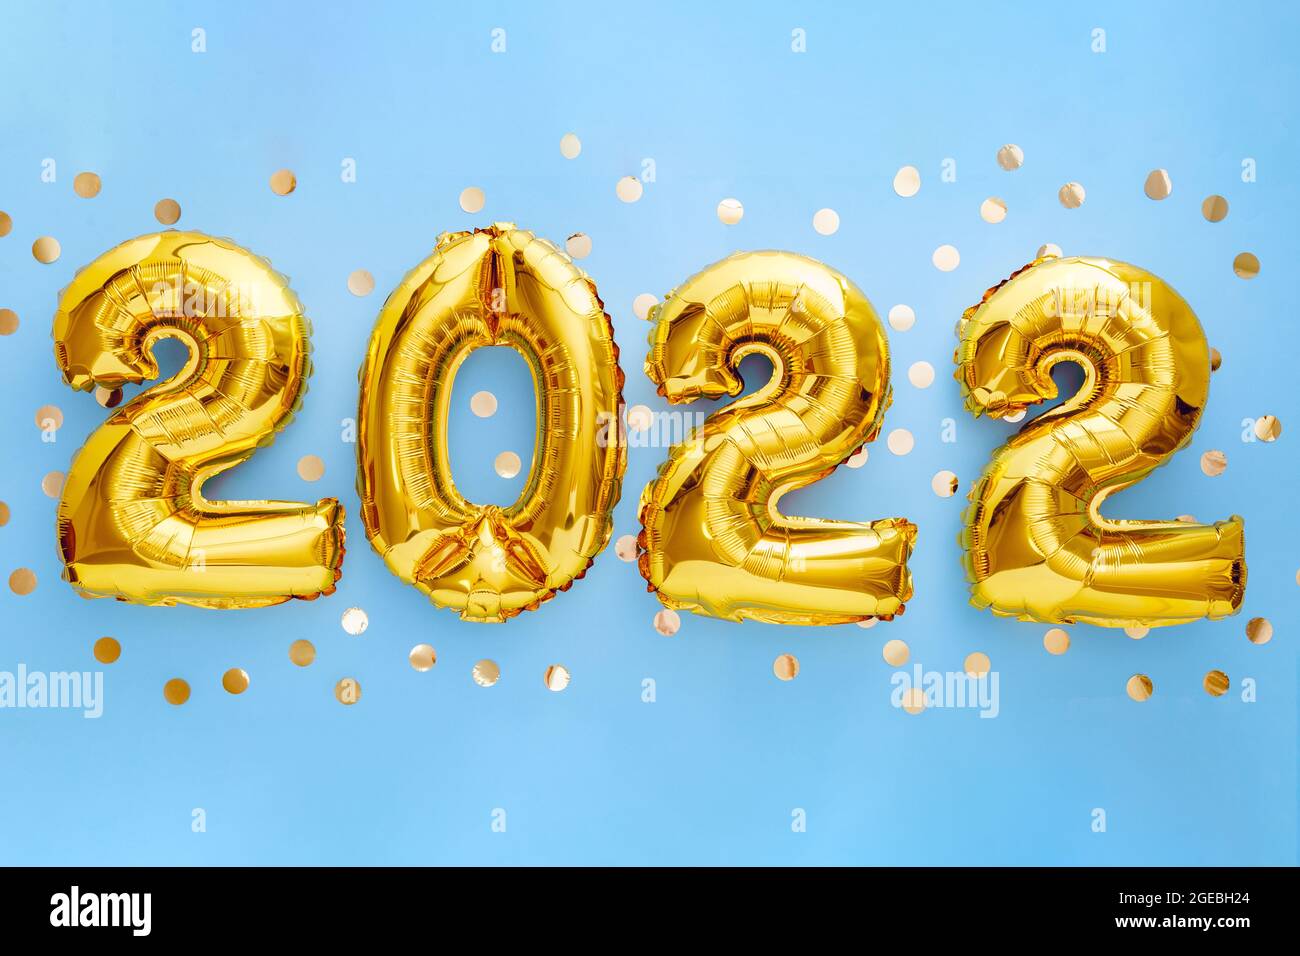 2022 gold foil balloons calendar. 2022 numeral balloon gold text Happy New year eve invitation with Christmas on Blue background with golden confetti Stock Photo